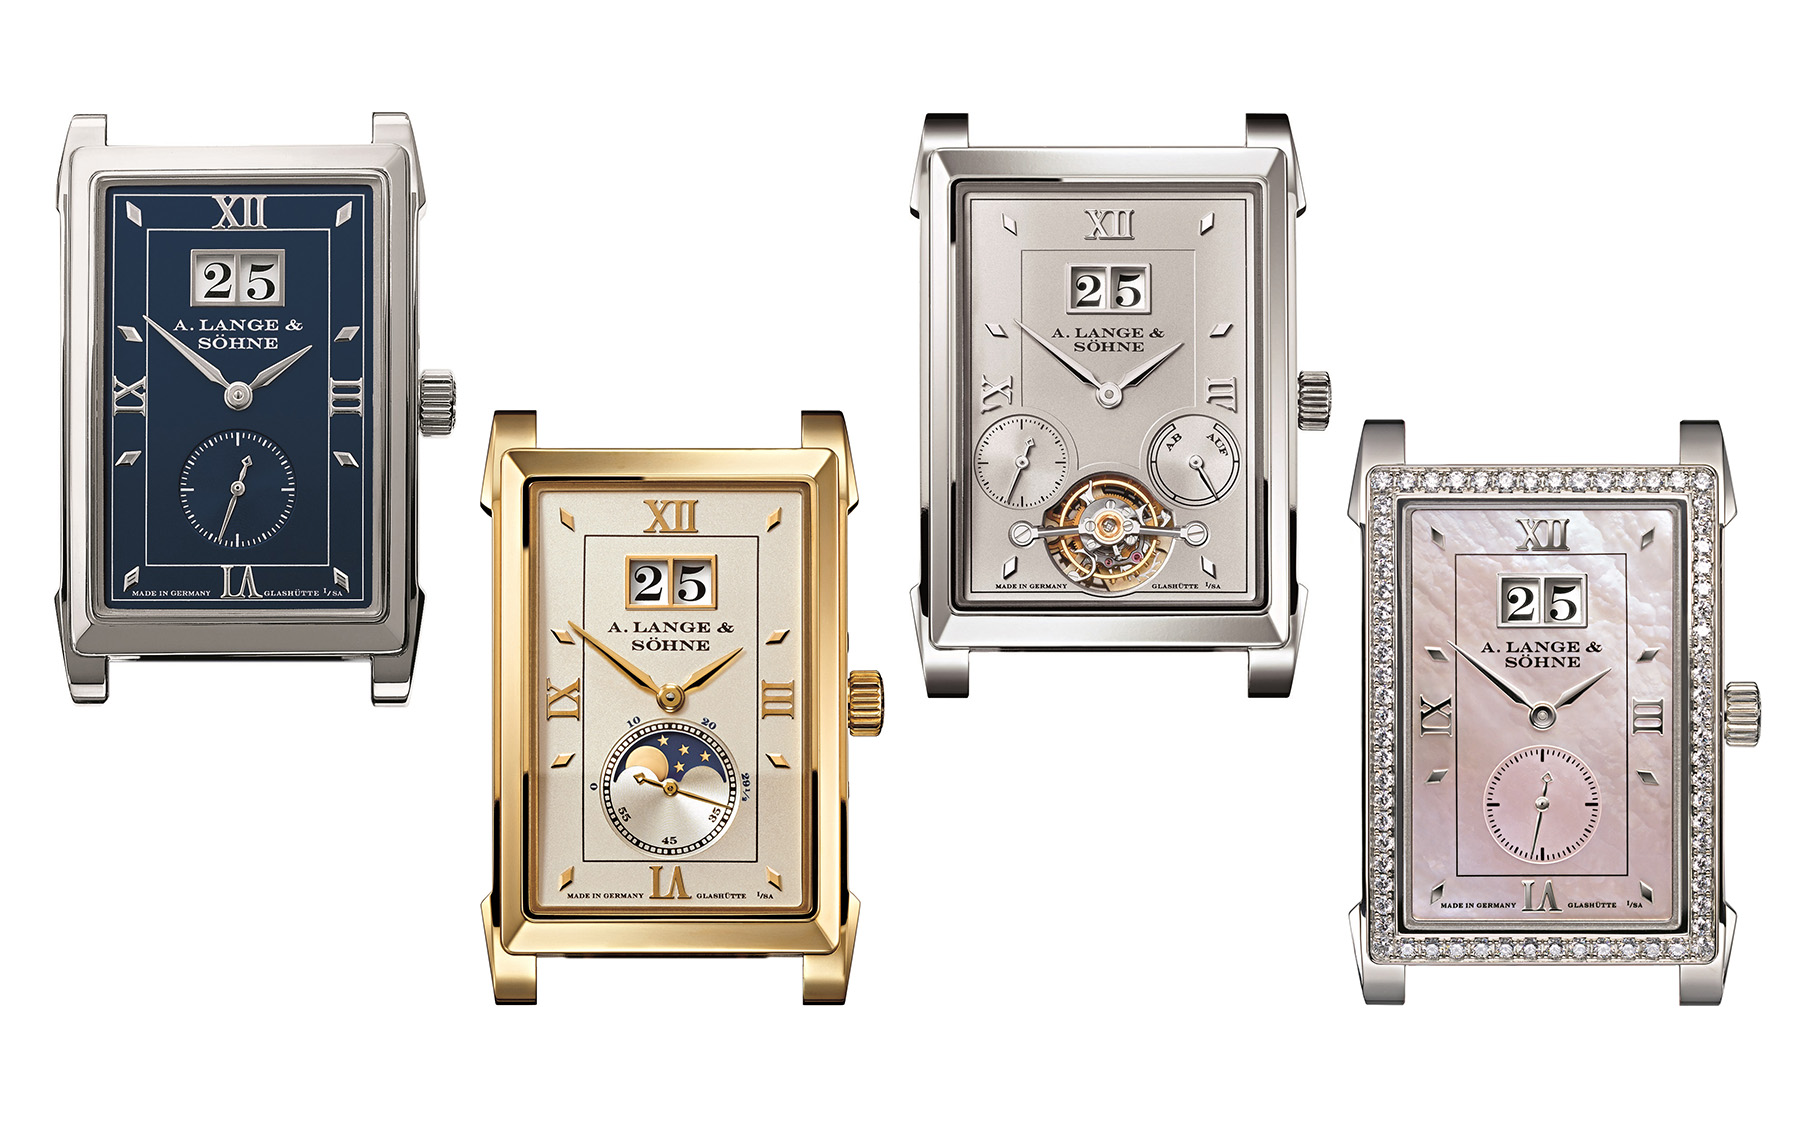 a lange söhne cabaret collection in all metals and references